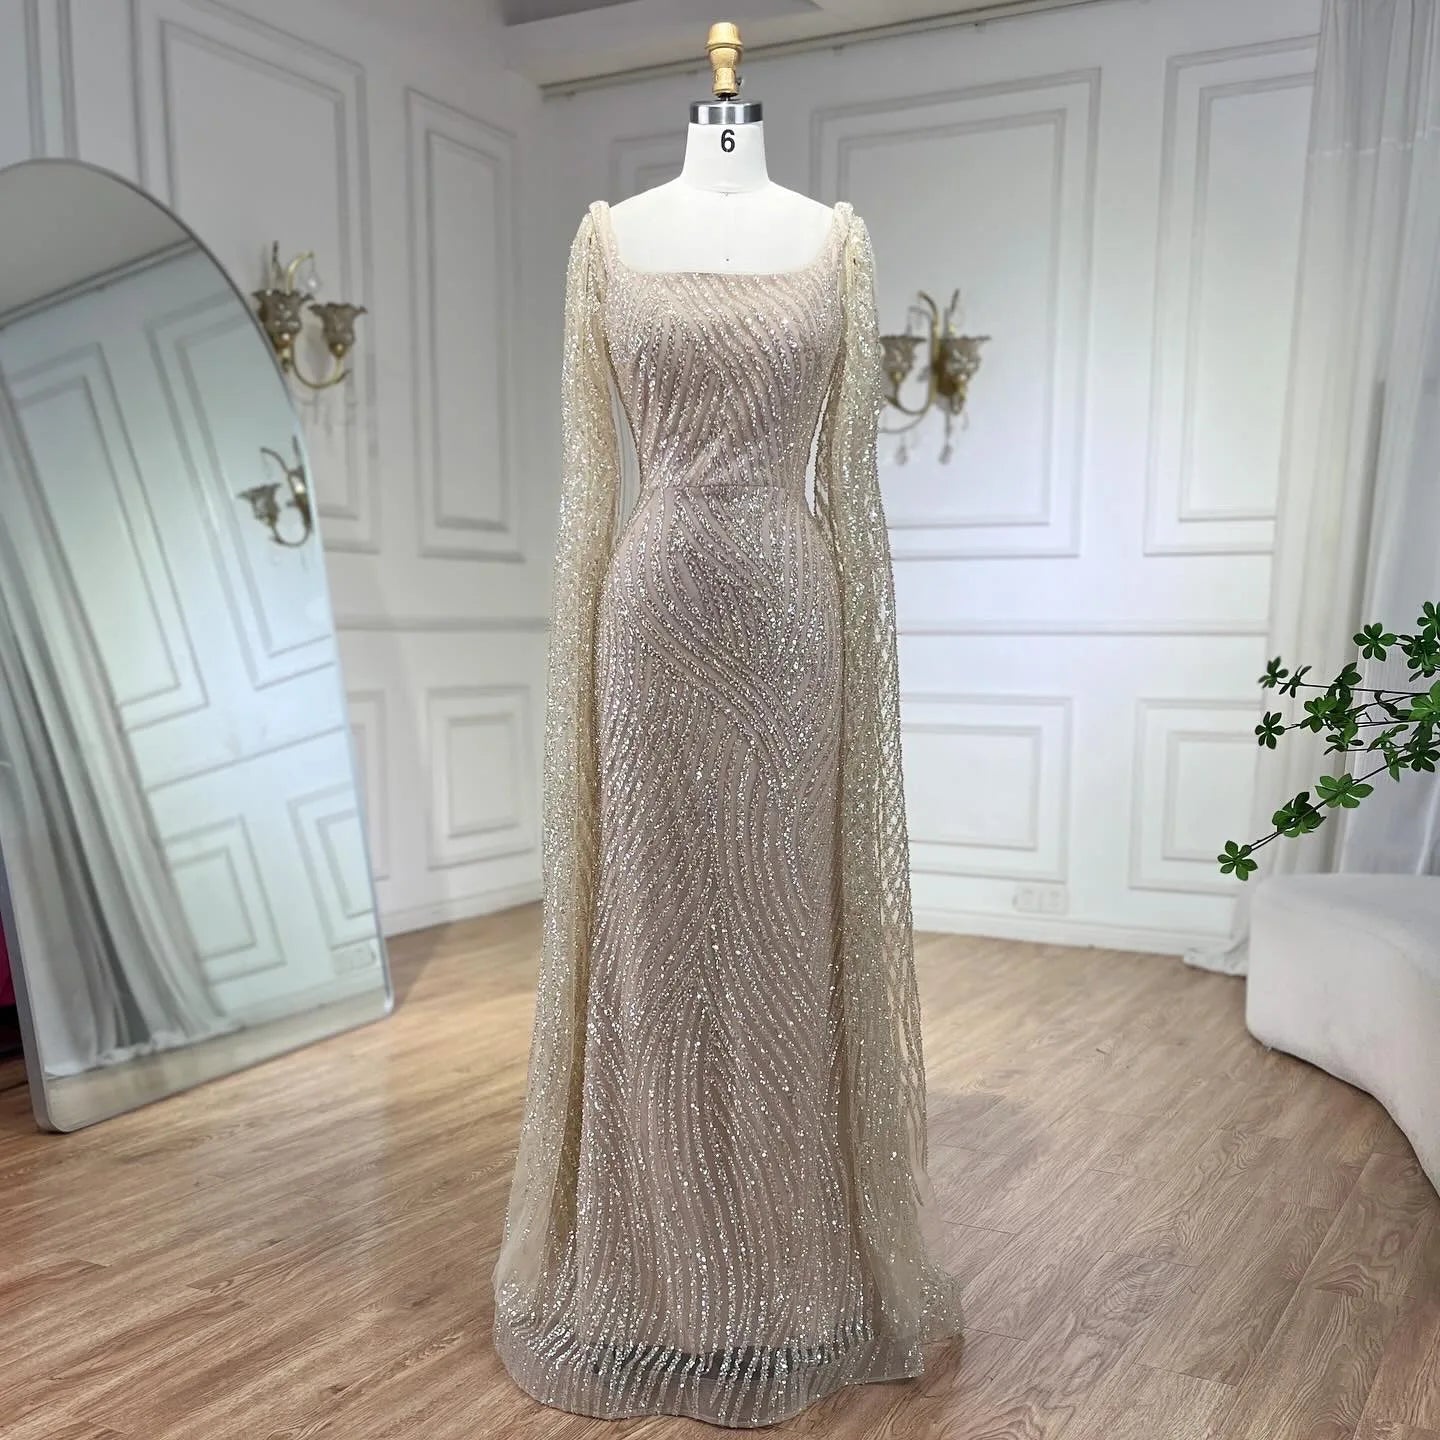 Elegant Cape Sleeves with Beaded Design for Luxury Evening Weddings and Parties